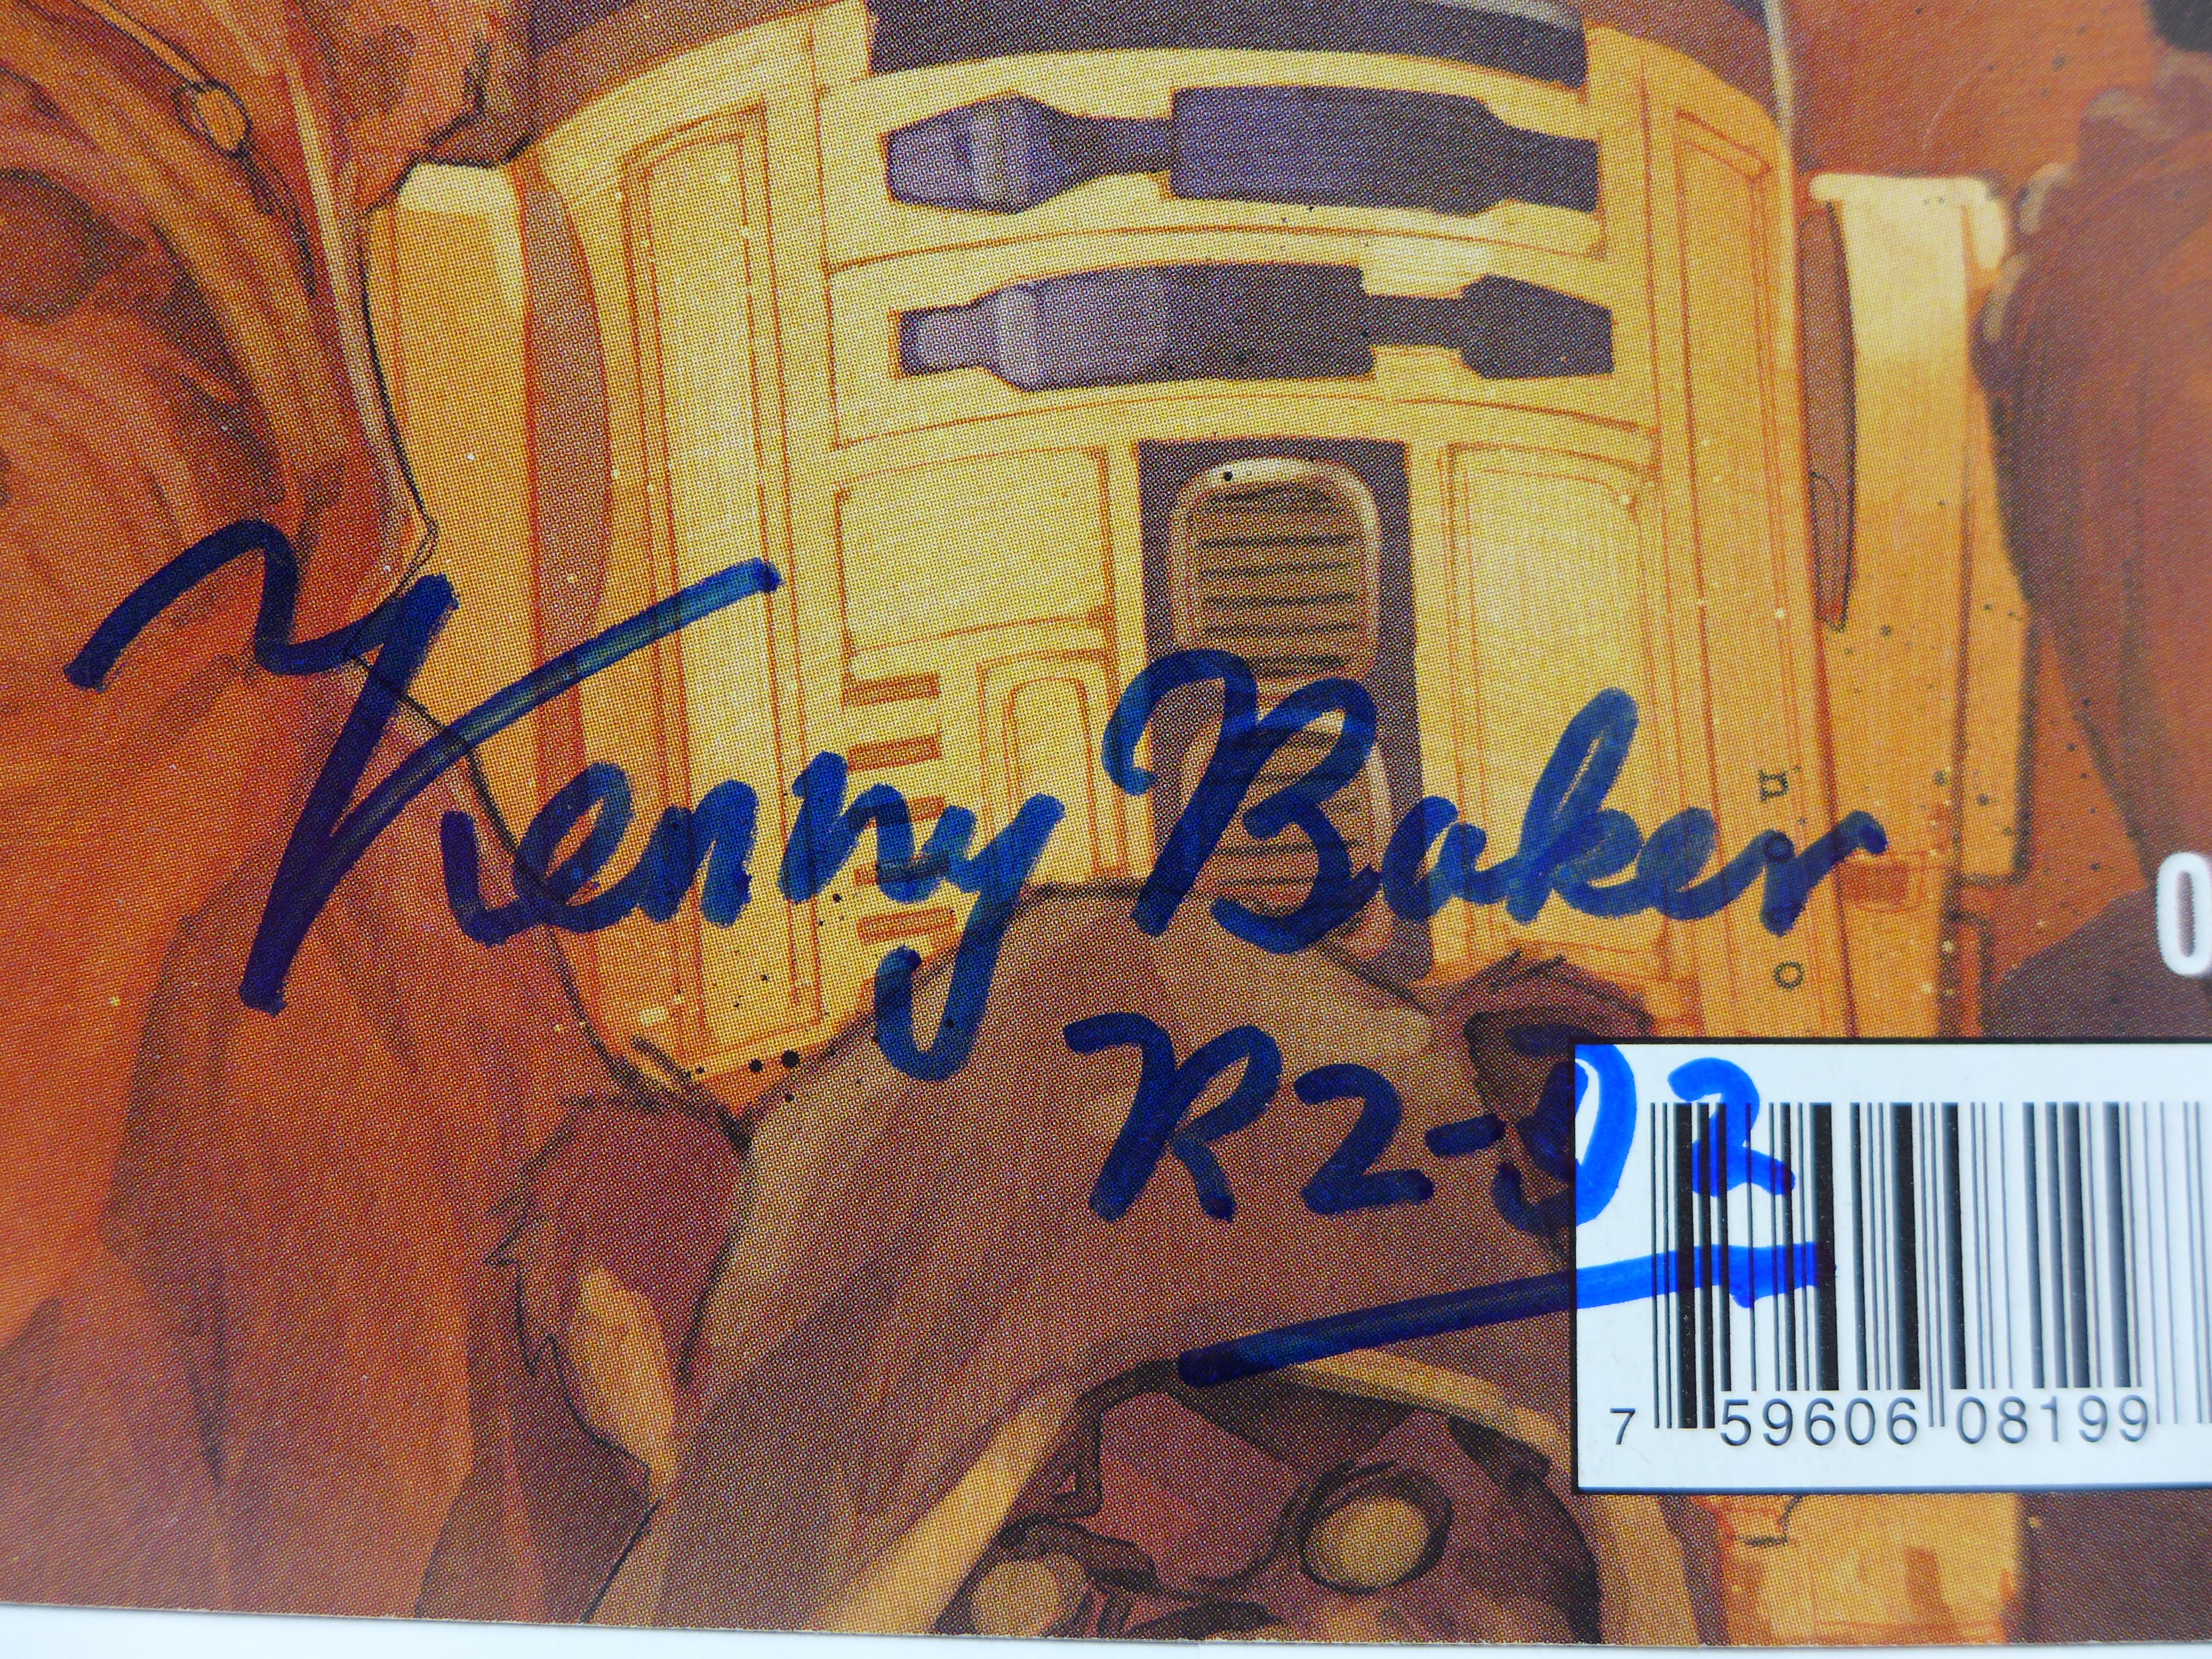 A Star Wars comic signed by Kenny Baker (R2D2) and Anthony Daniels (C3PO) - Image 3 of 3